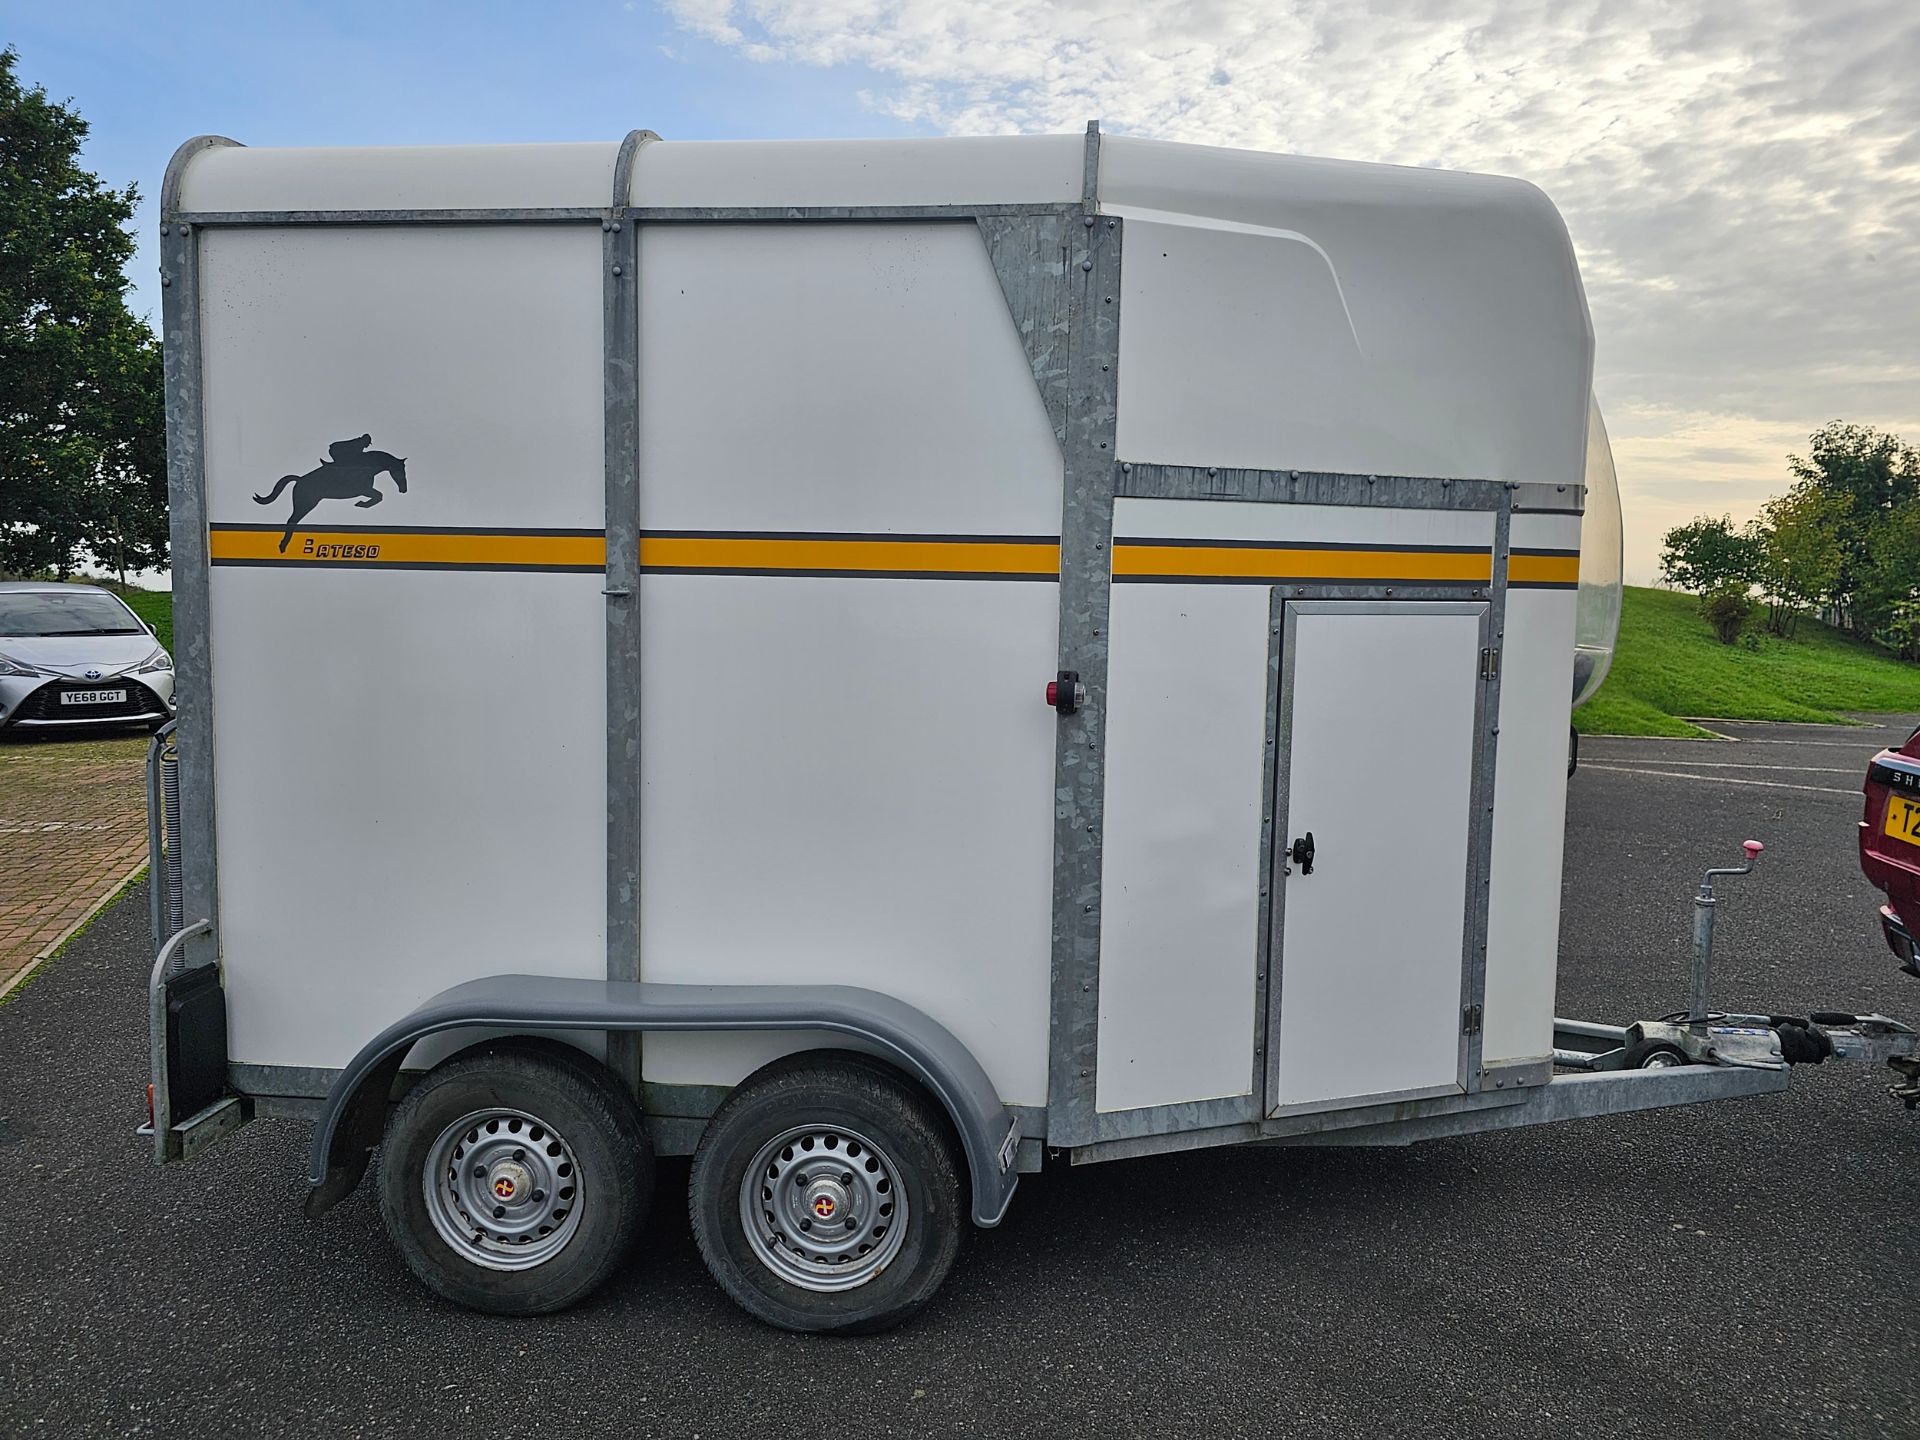 A Bateson Deauville horse trailer, 2300kg weight limit, with composite floor, very little use and - Image 7 of 16